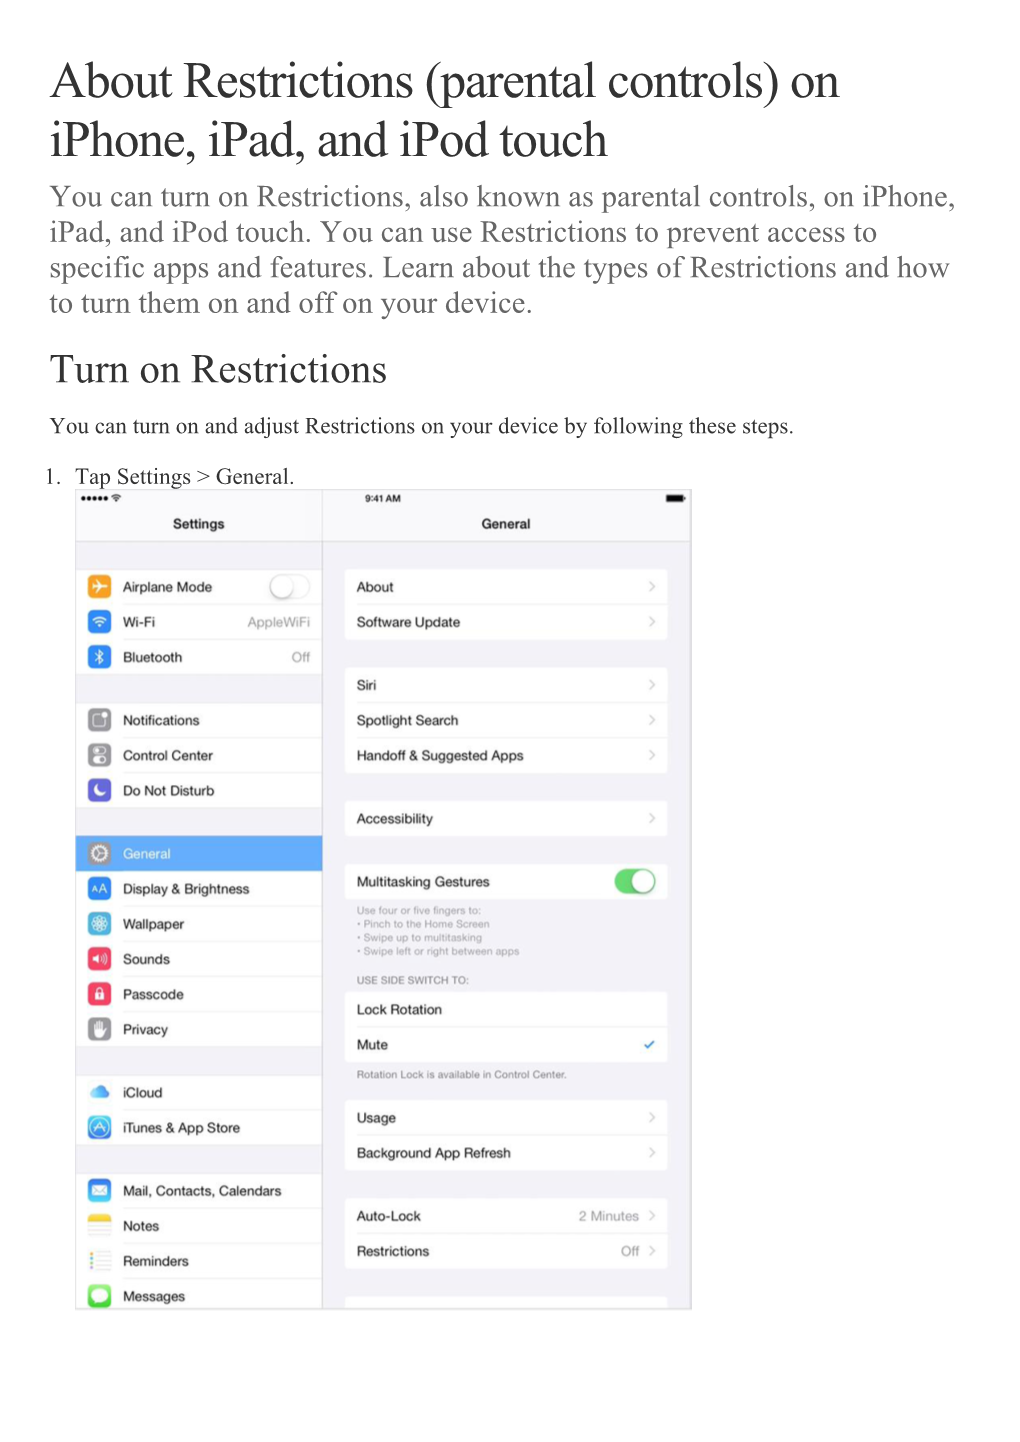 About Restrictions (Parental Controls) on Iphone, Ipad, and Ipod Touch You Can Turn on Restrictions, Also Known As Parental Controls, on Iphone, Ipad, and Ipod Touch